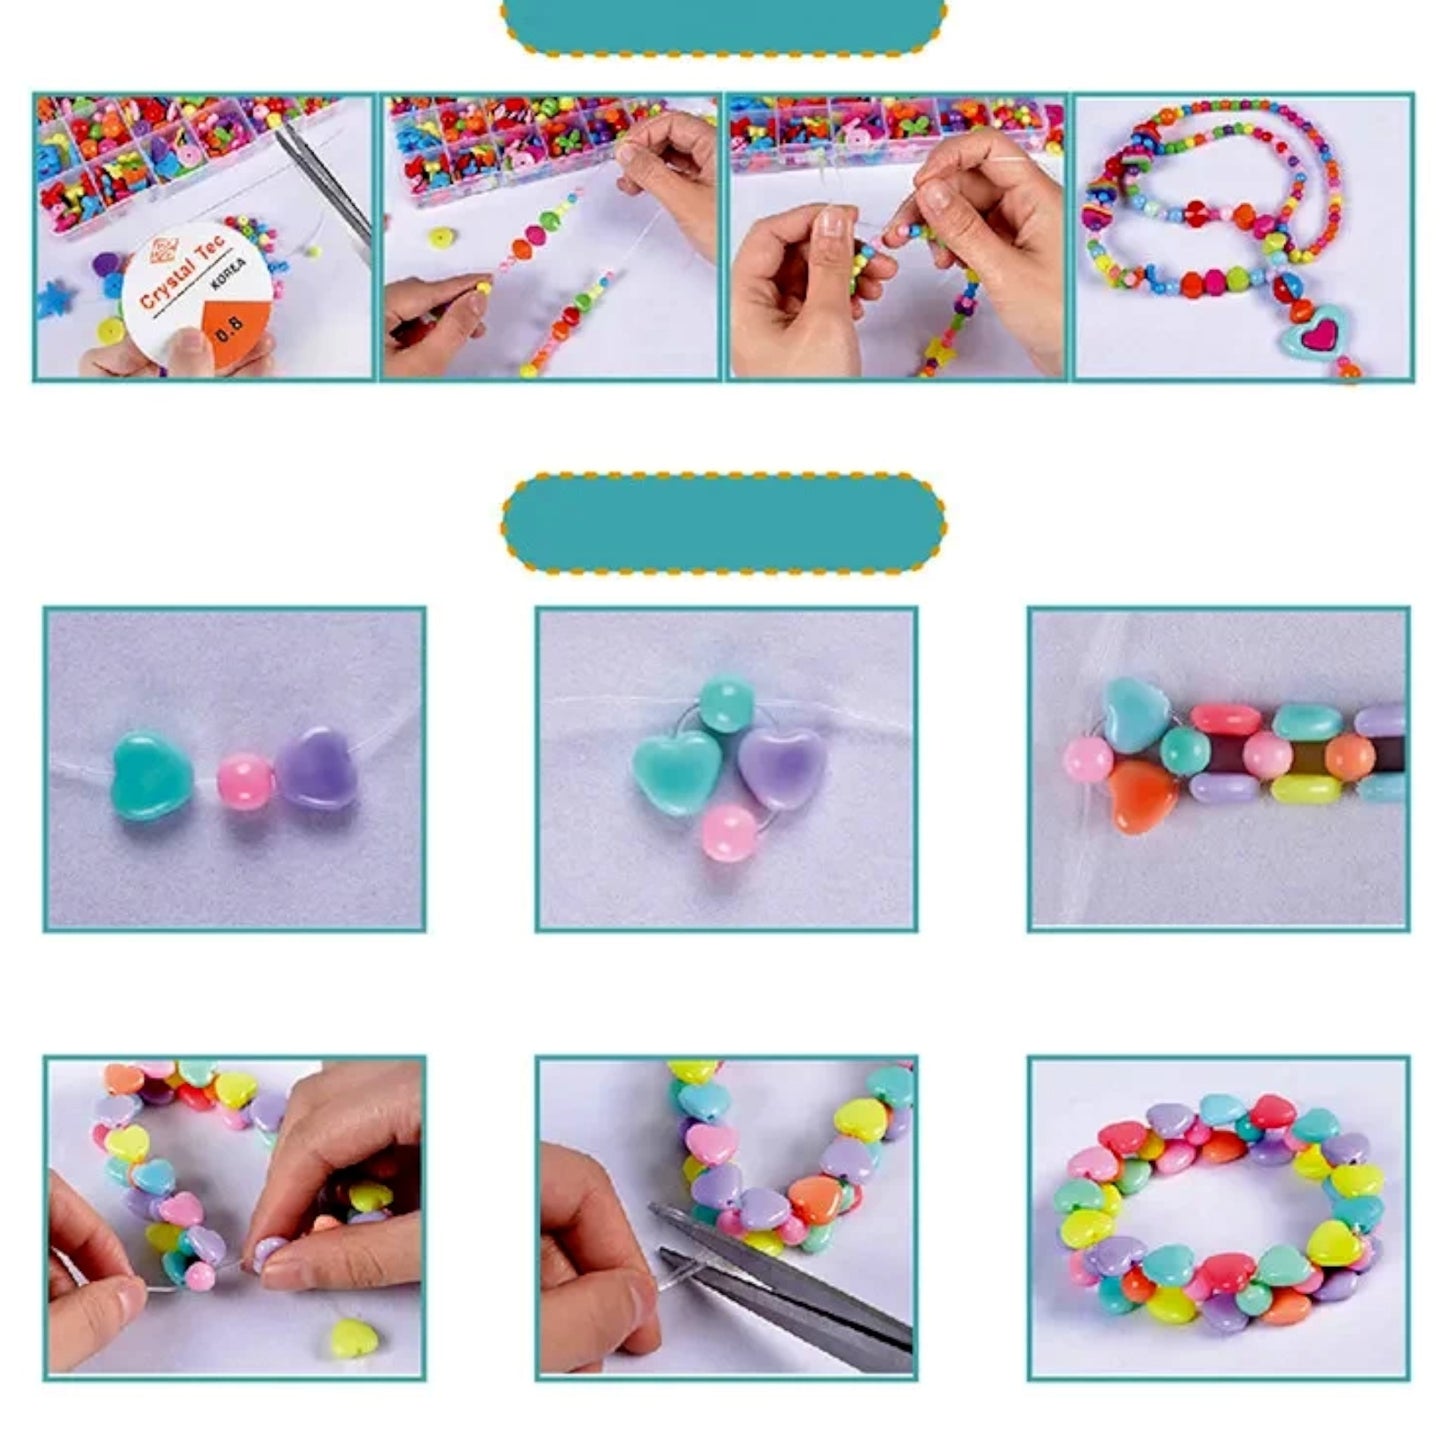 DIY Beading kits for making bracelets and other jewelry. - VadymShop